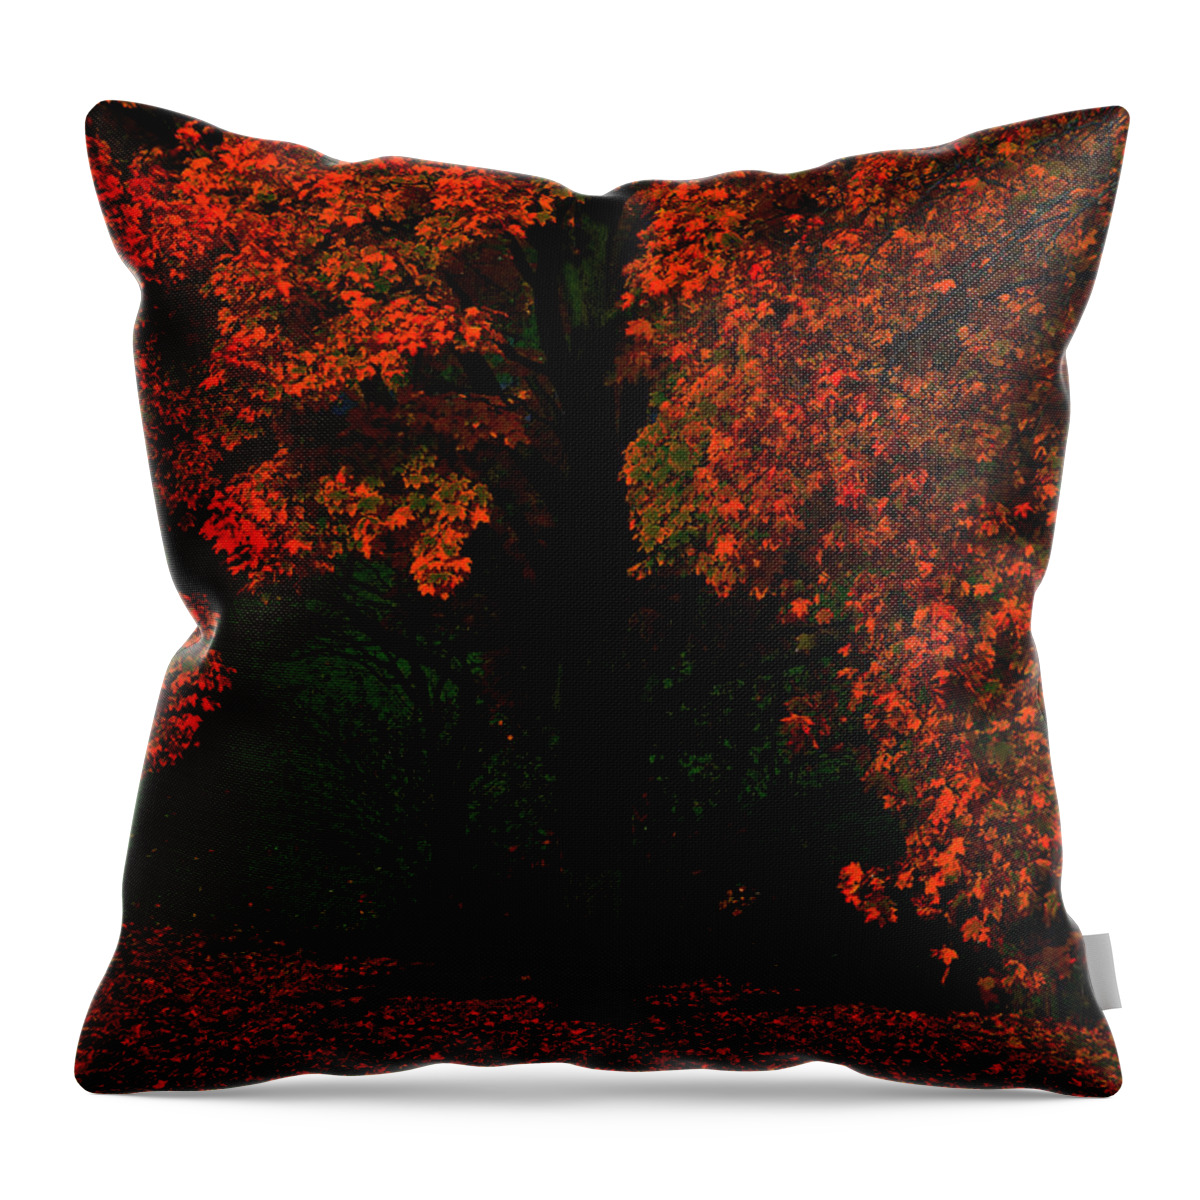 Moonlight Throw Pillow featuring the photograph Tree by Dragan Kudjerski